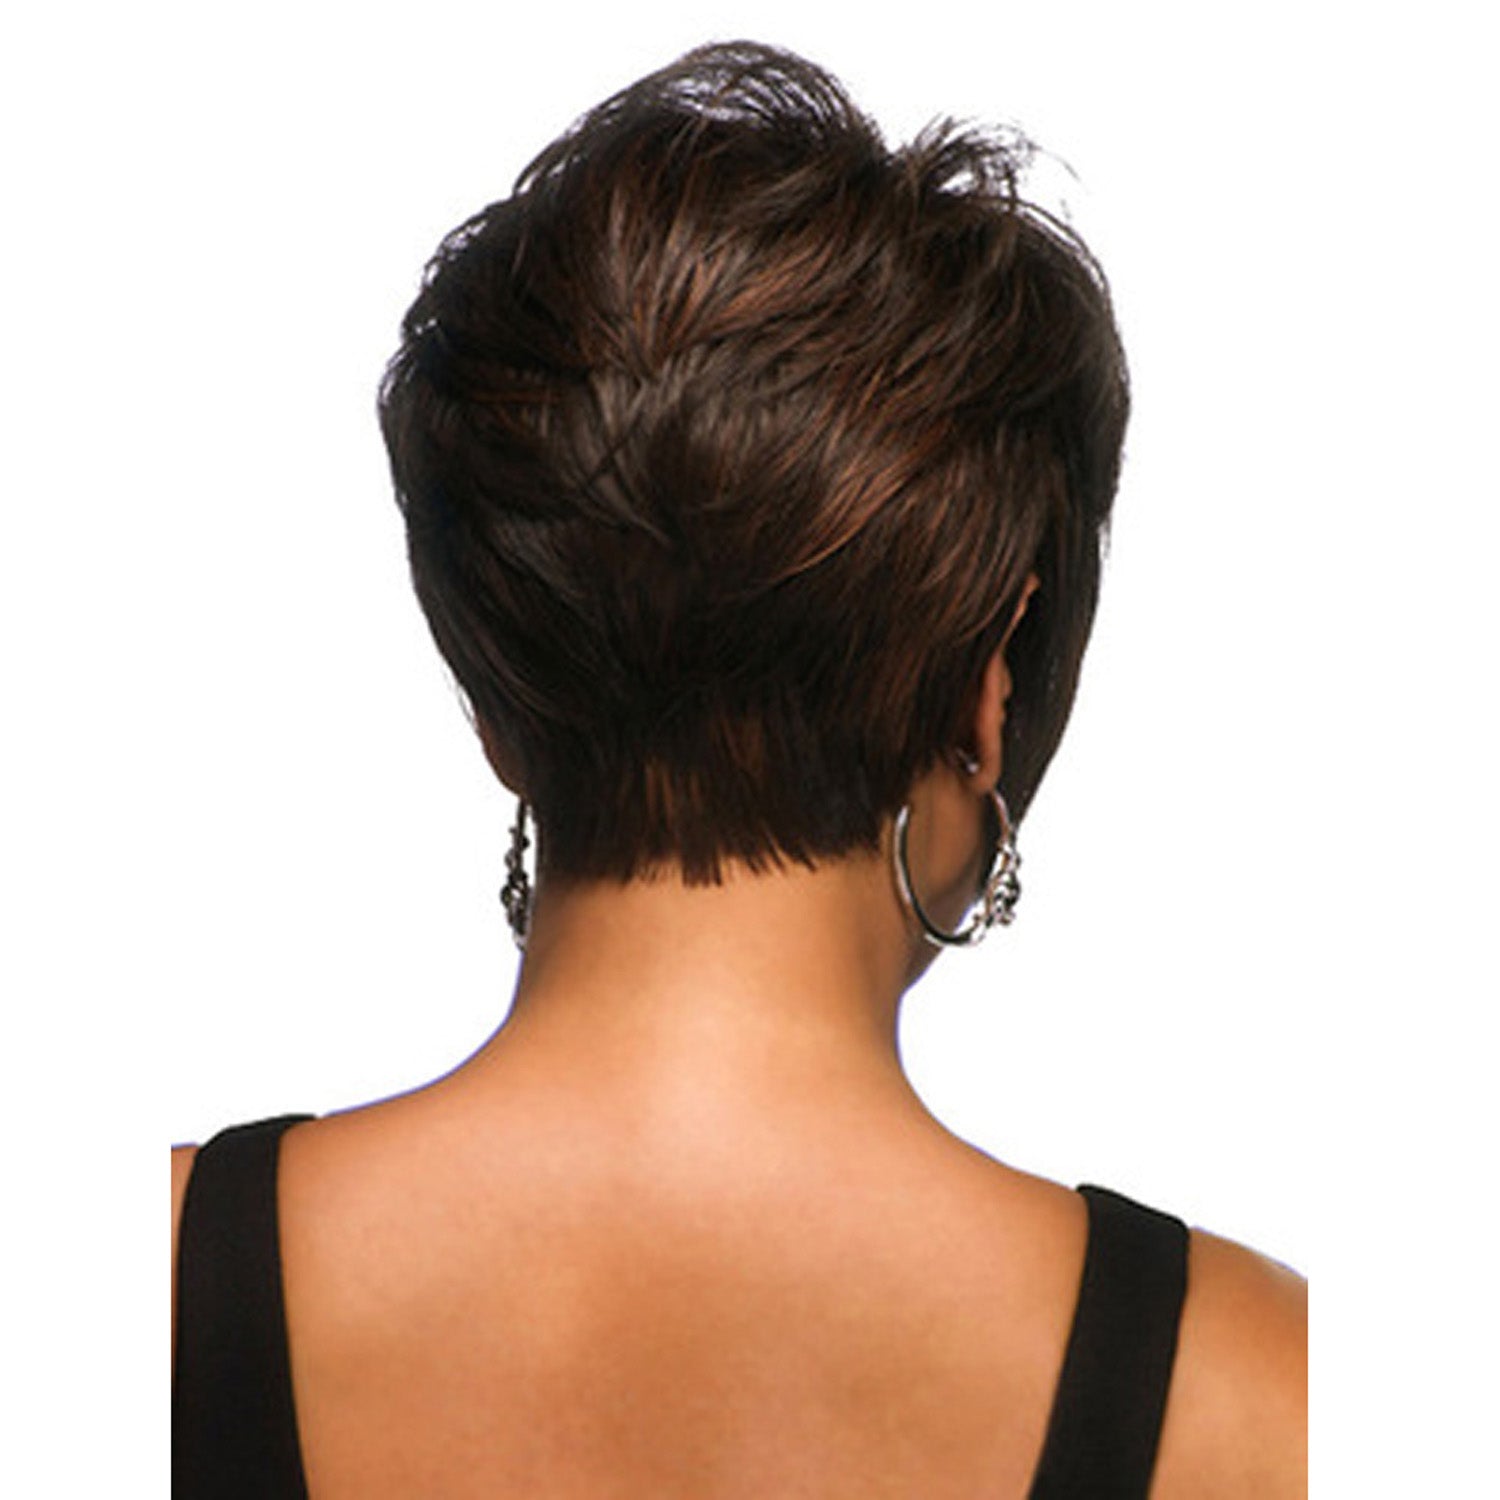 Lit | Brown Short Pixie Cut Straight Synthetic Hair Wig With Bangs